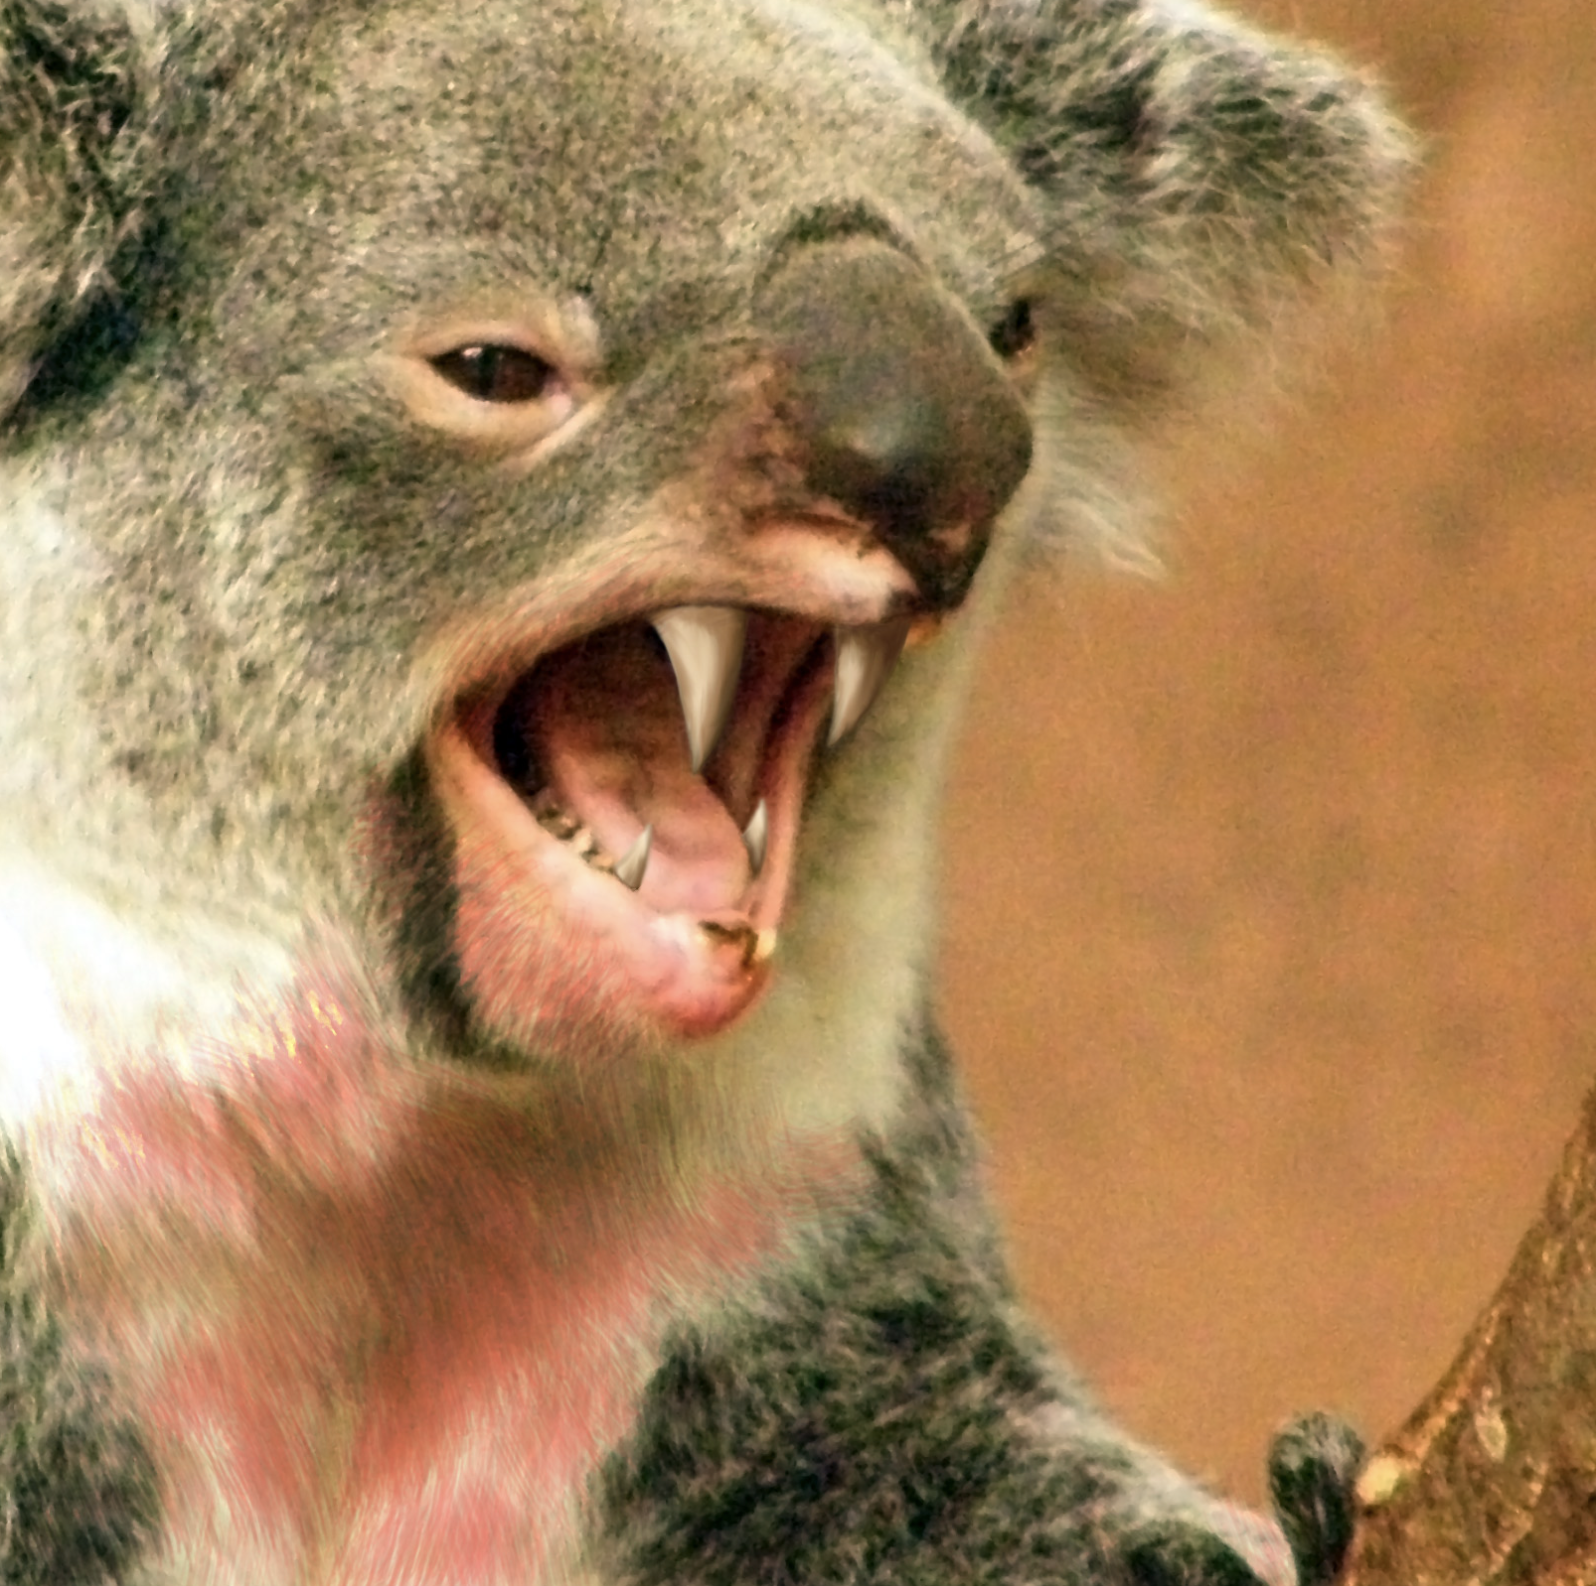 An angry &quot;drop bear&quot;